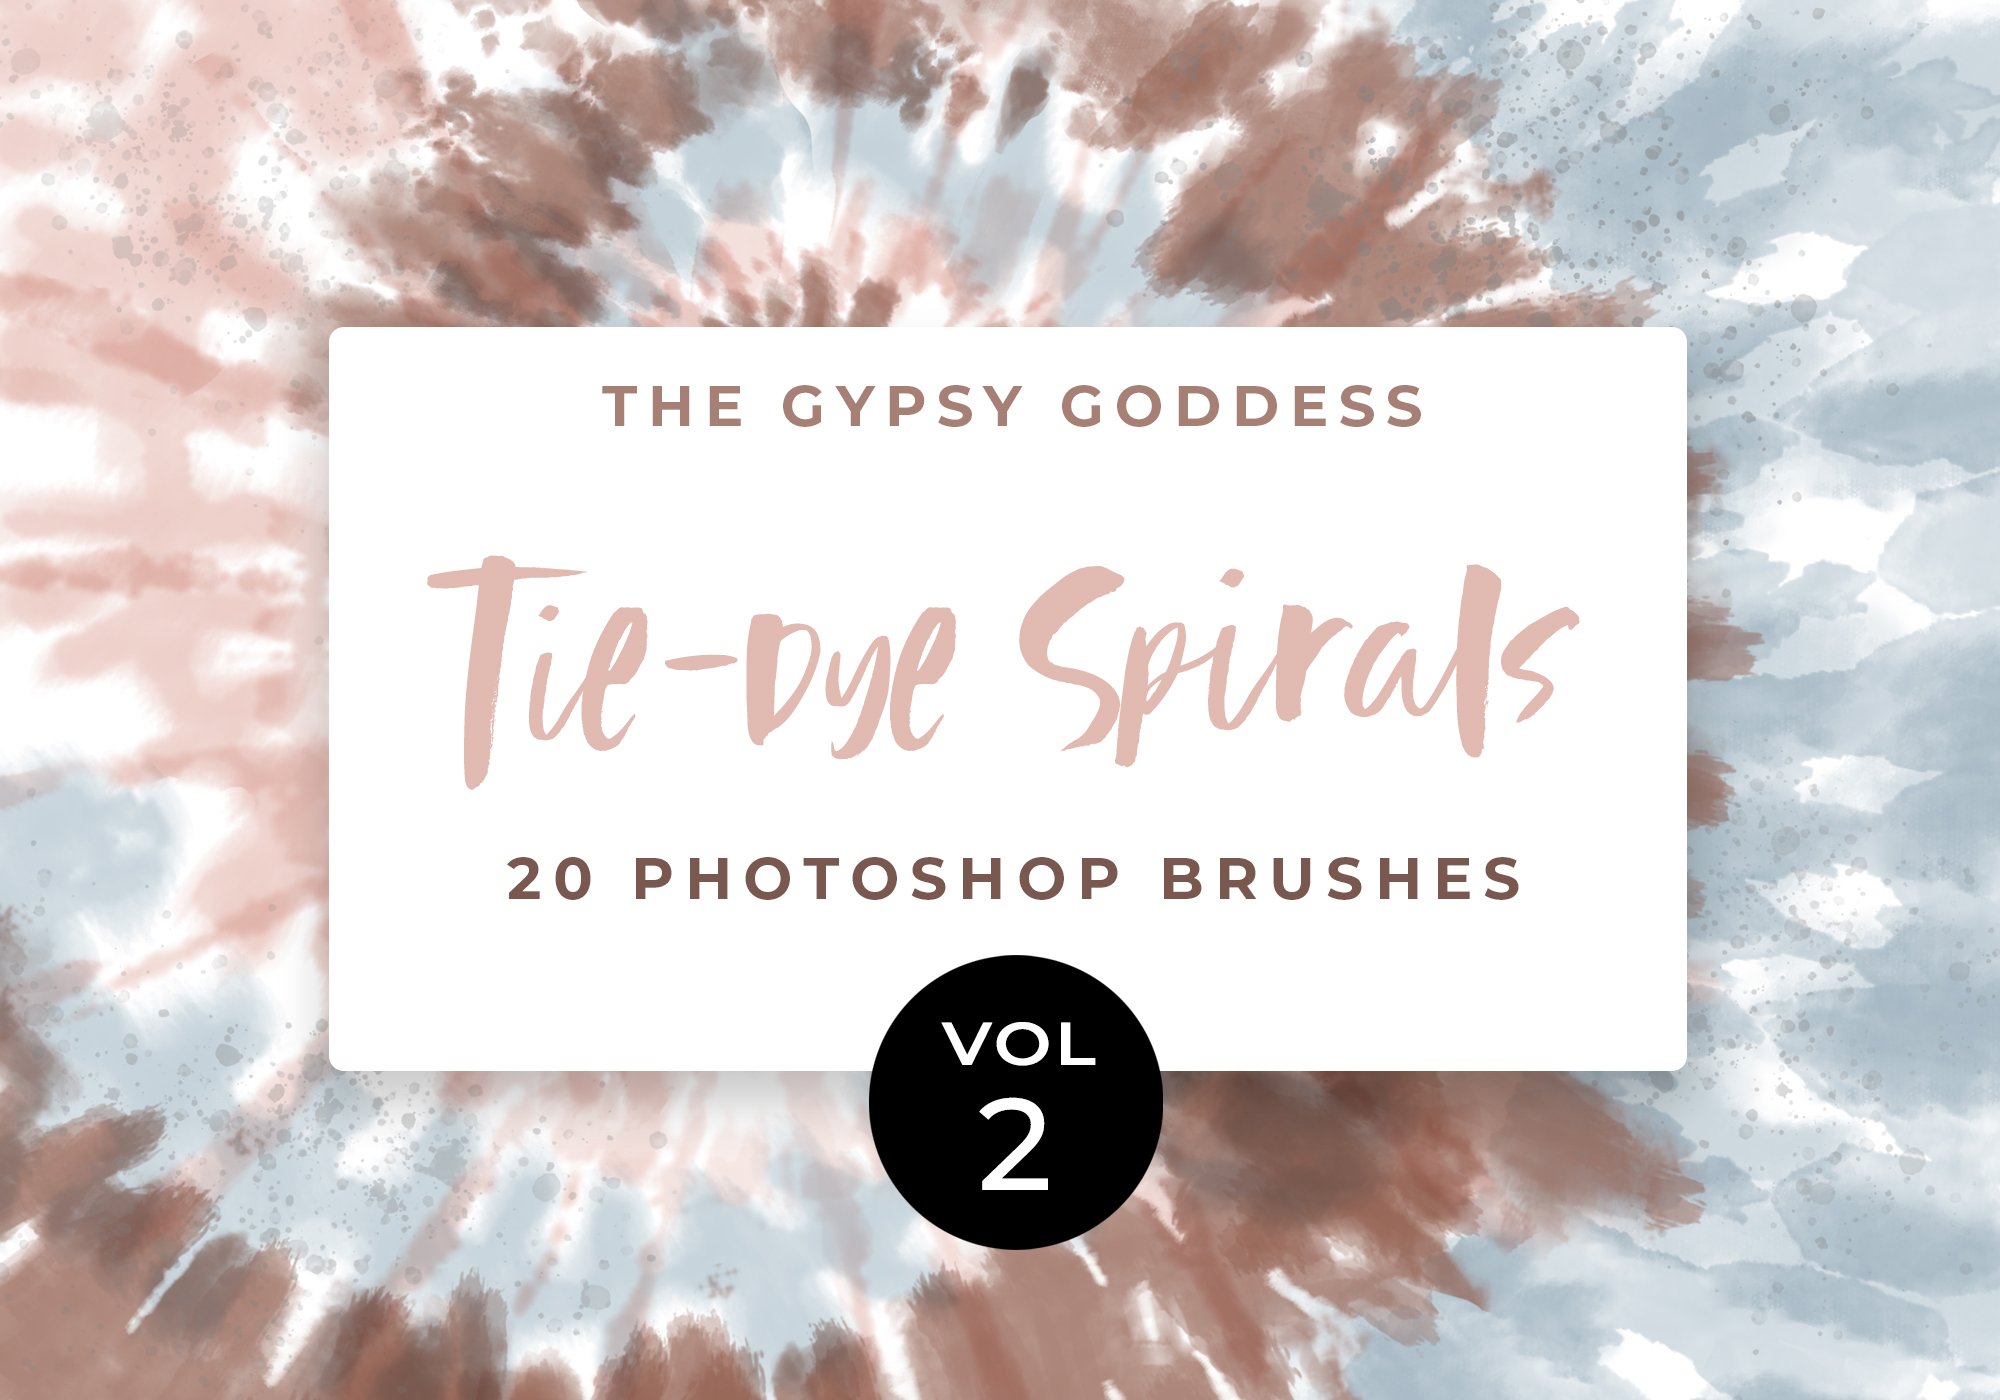 Tie-Dye Spirals Brushes Vol 2cover image.